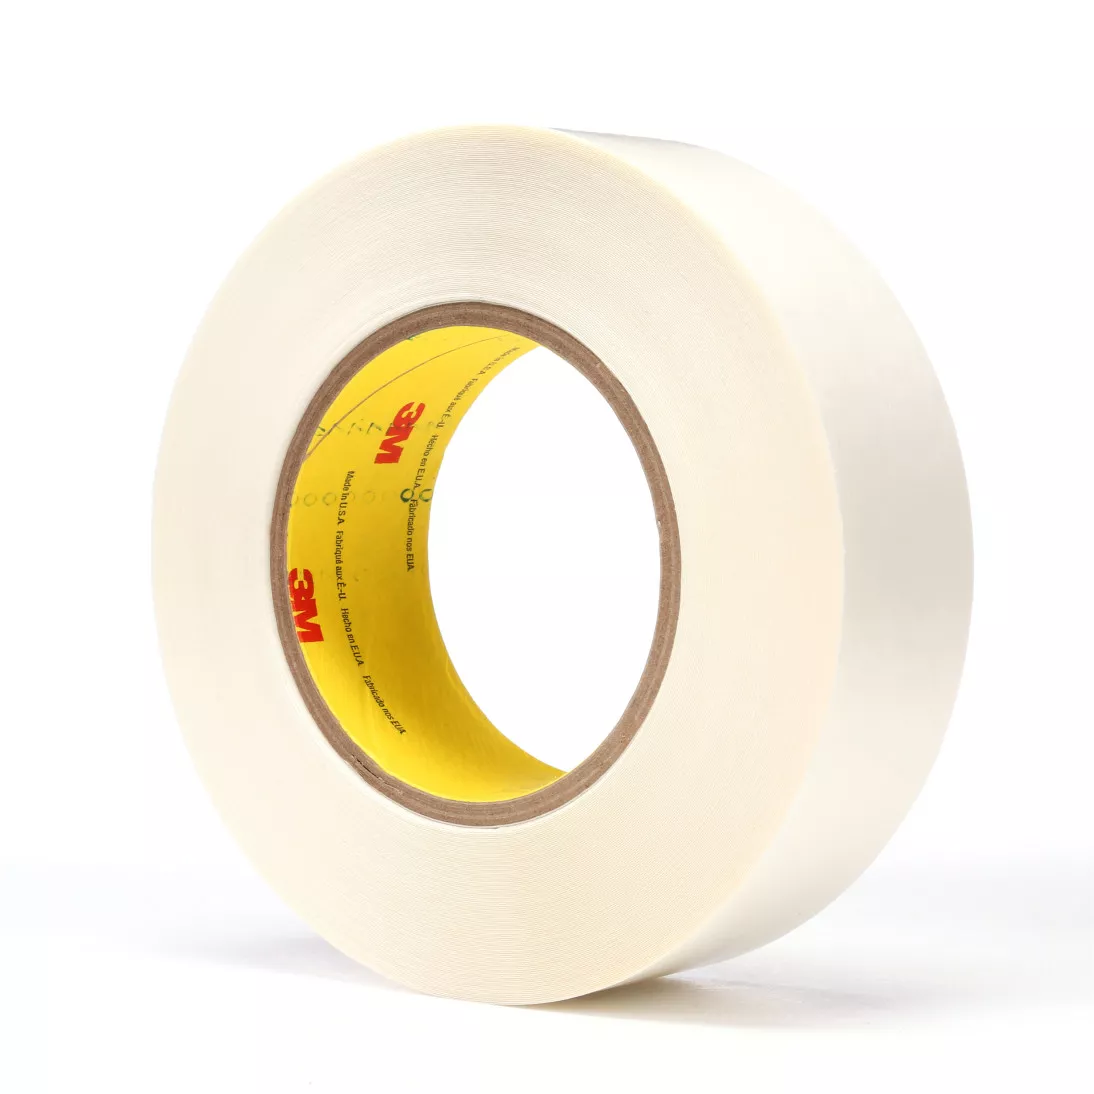 3M™ Double Coated Tape 9579, White, 1 1/2 in x 36 yd, 9 mil, 24 rolls
per case